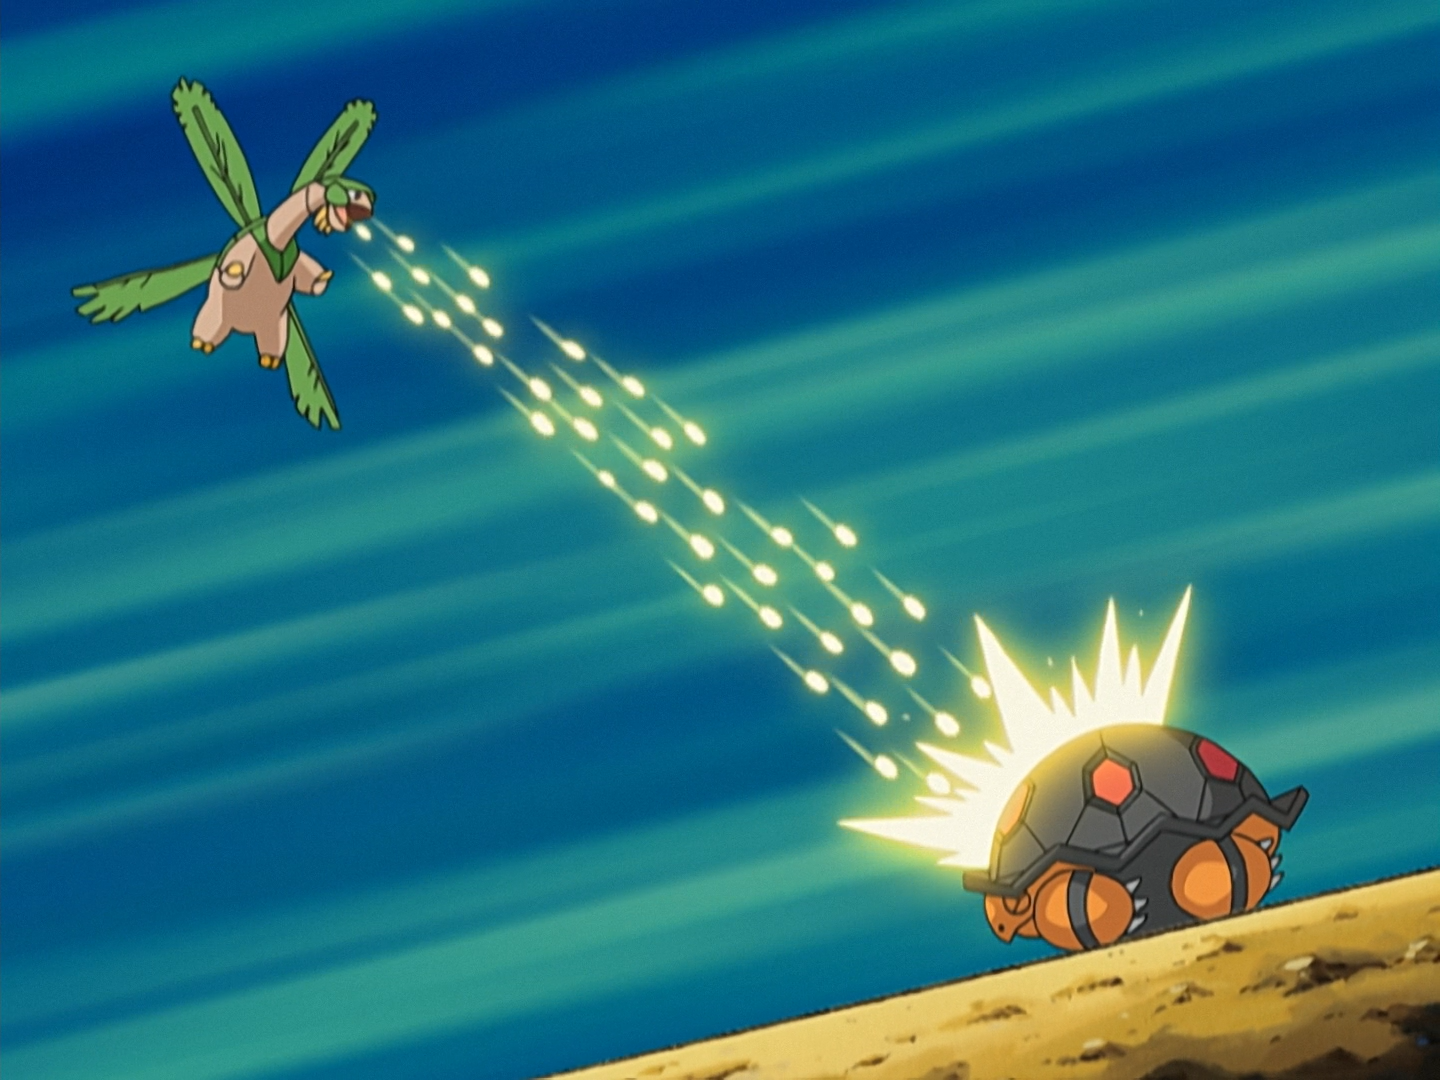 http://vignette3.wikia.nocookie.net/pokemon/images/5/5b/Dominick_Tropius_Bullet_Seed.png/revision/